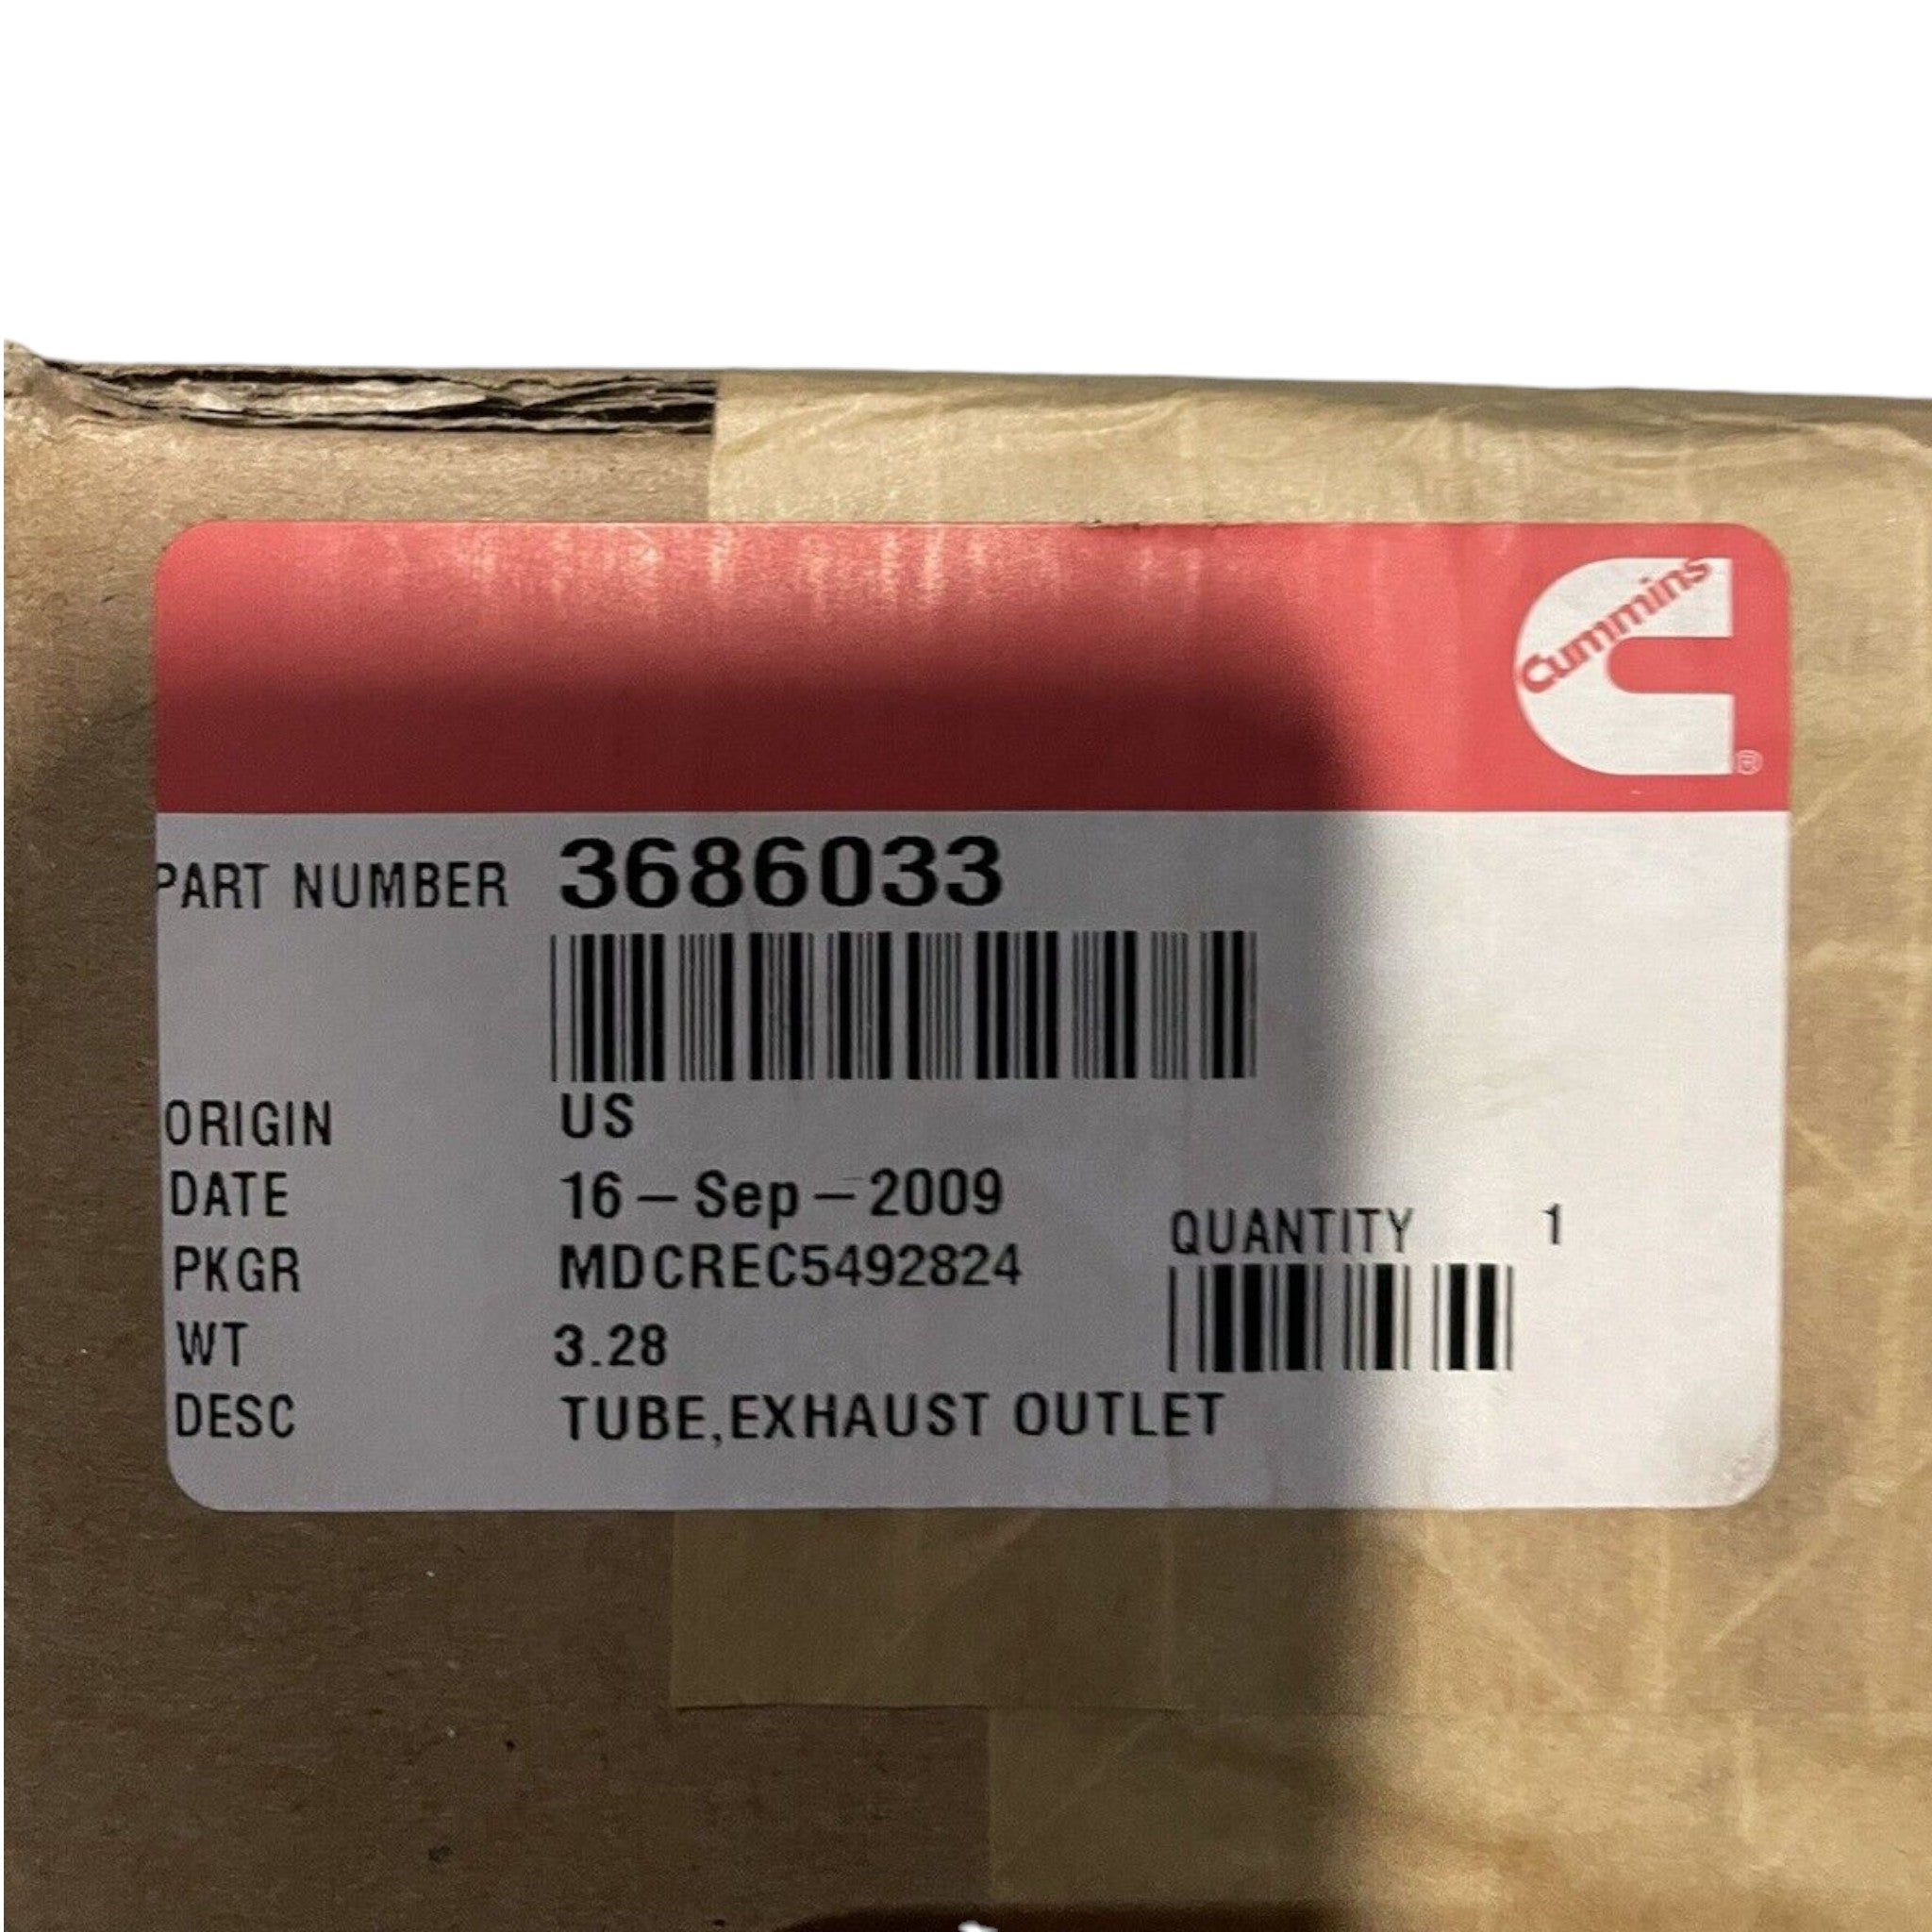 3694474 Genuine Cummins® Tube Exhaust Outlet For Cummins